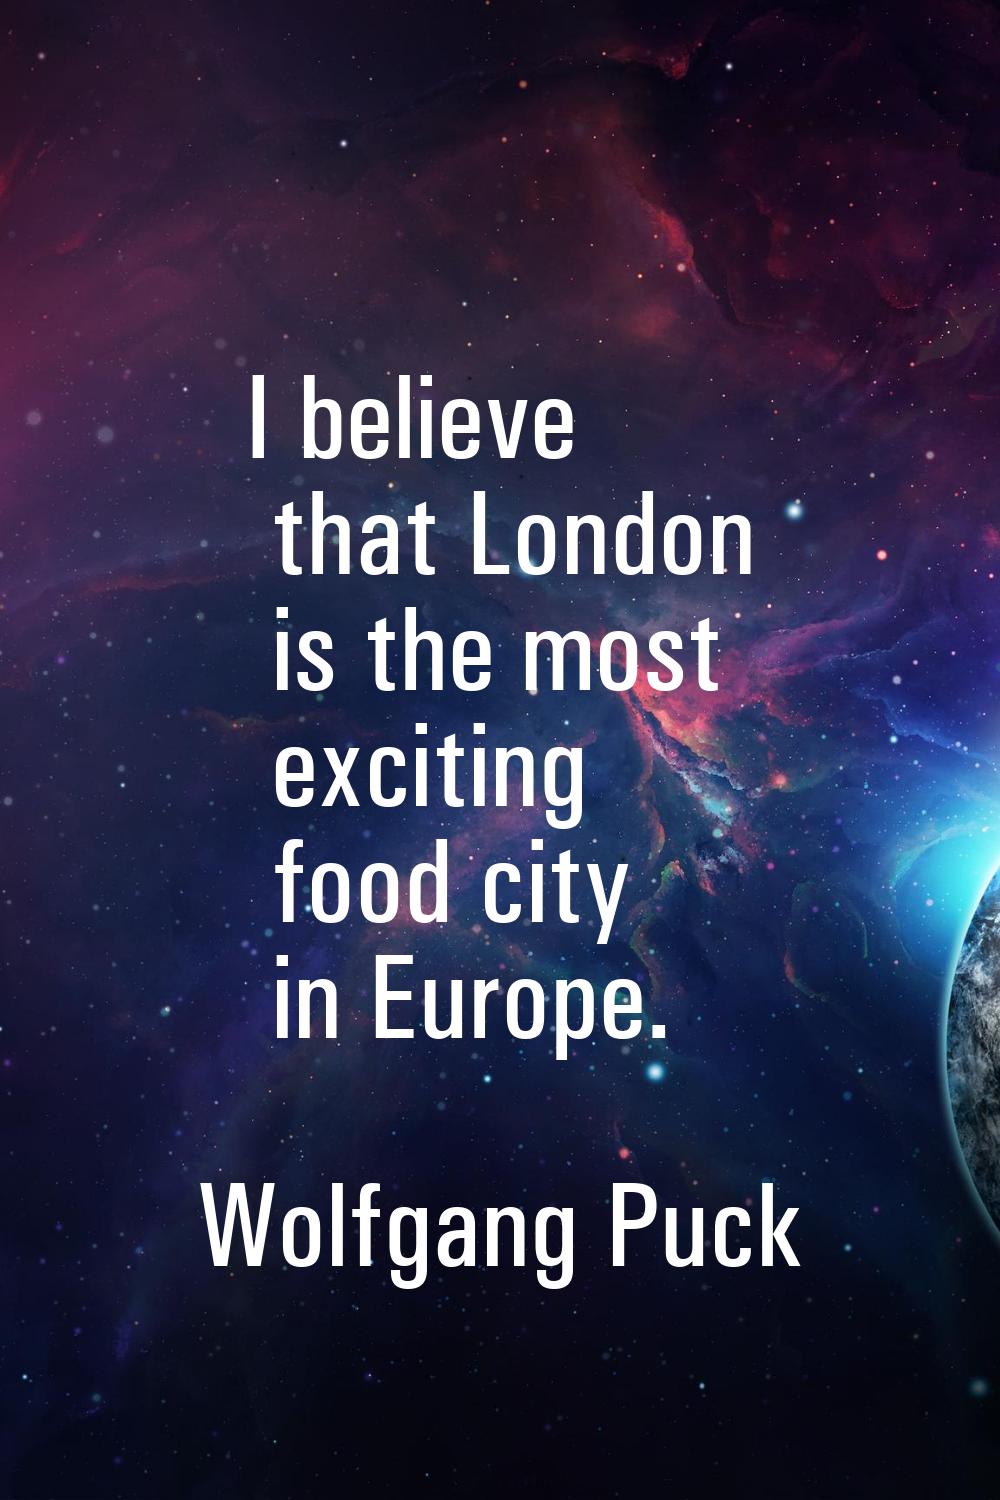 I believe that London is the most exciting food city in Europe.